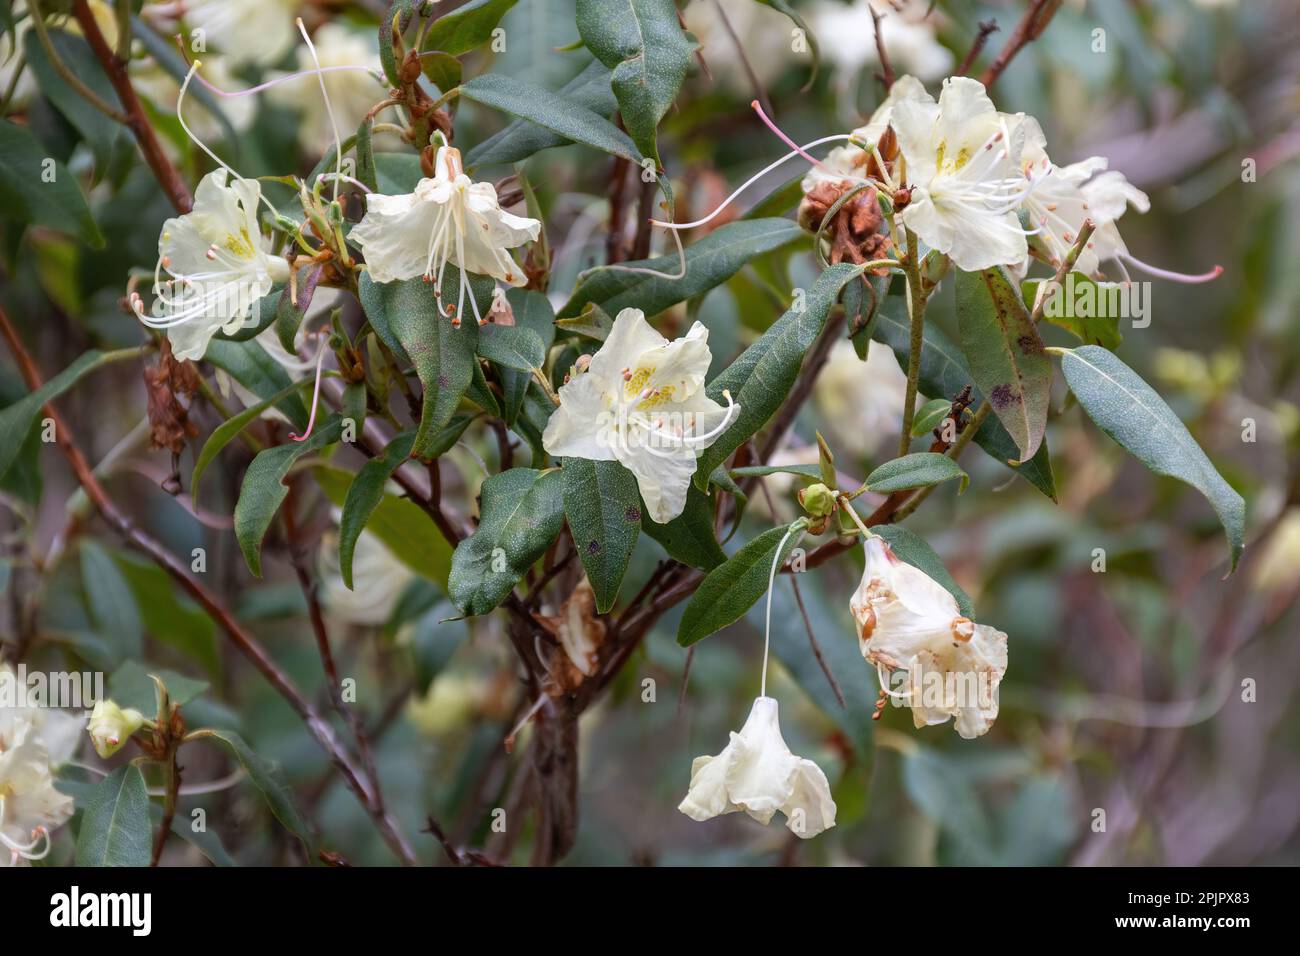 Flowers of Rhododendron lutescens (Triflora subsection) shrub flowering in spring or April, UK Stock Photo